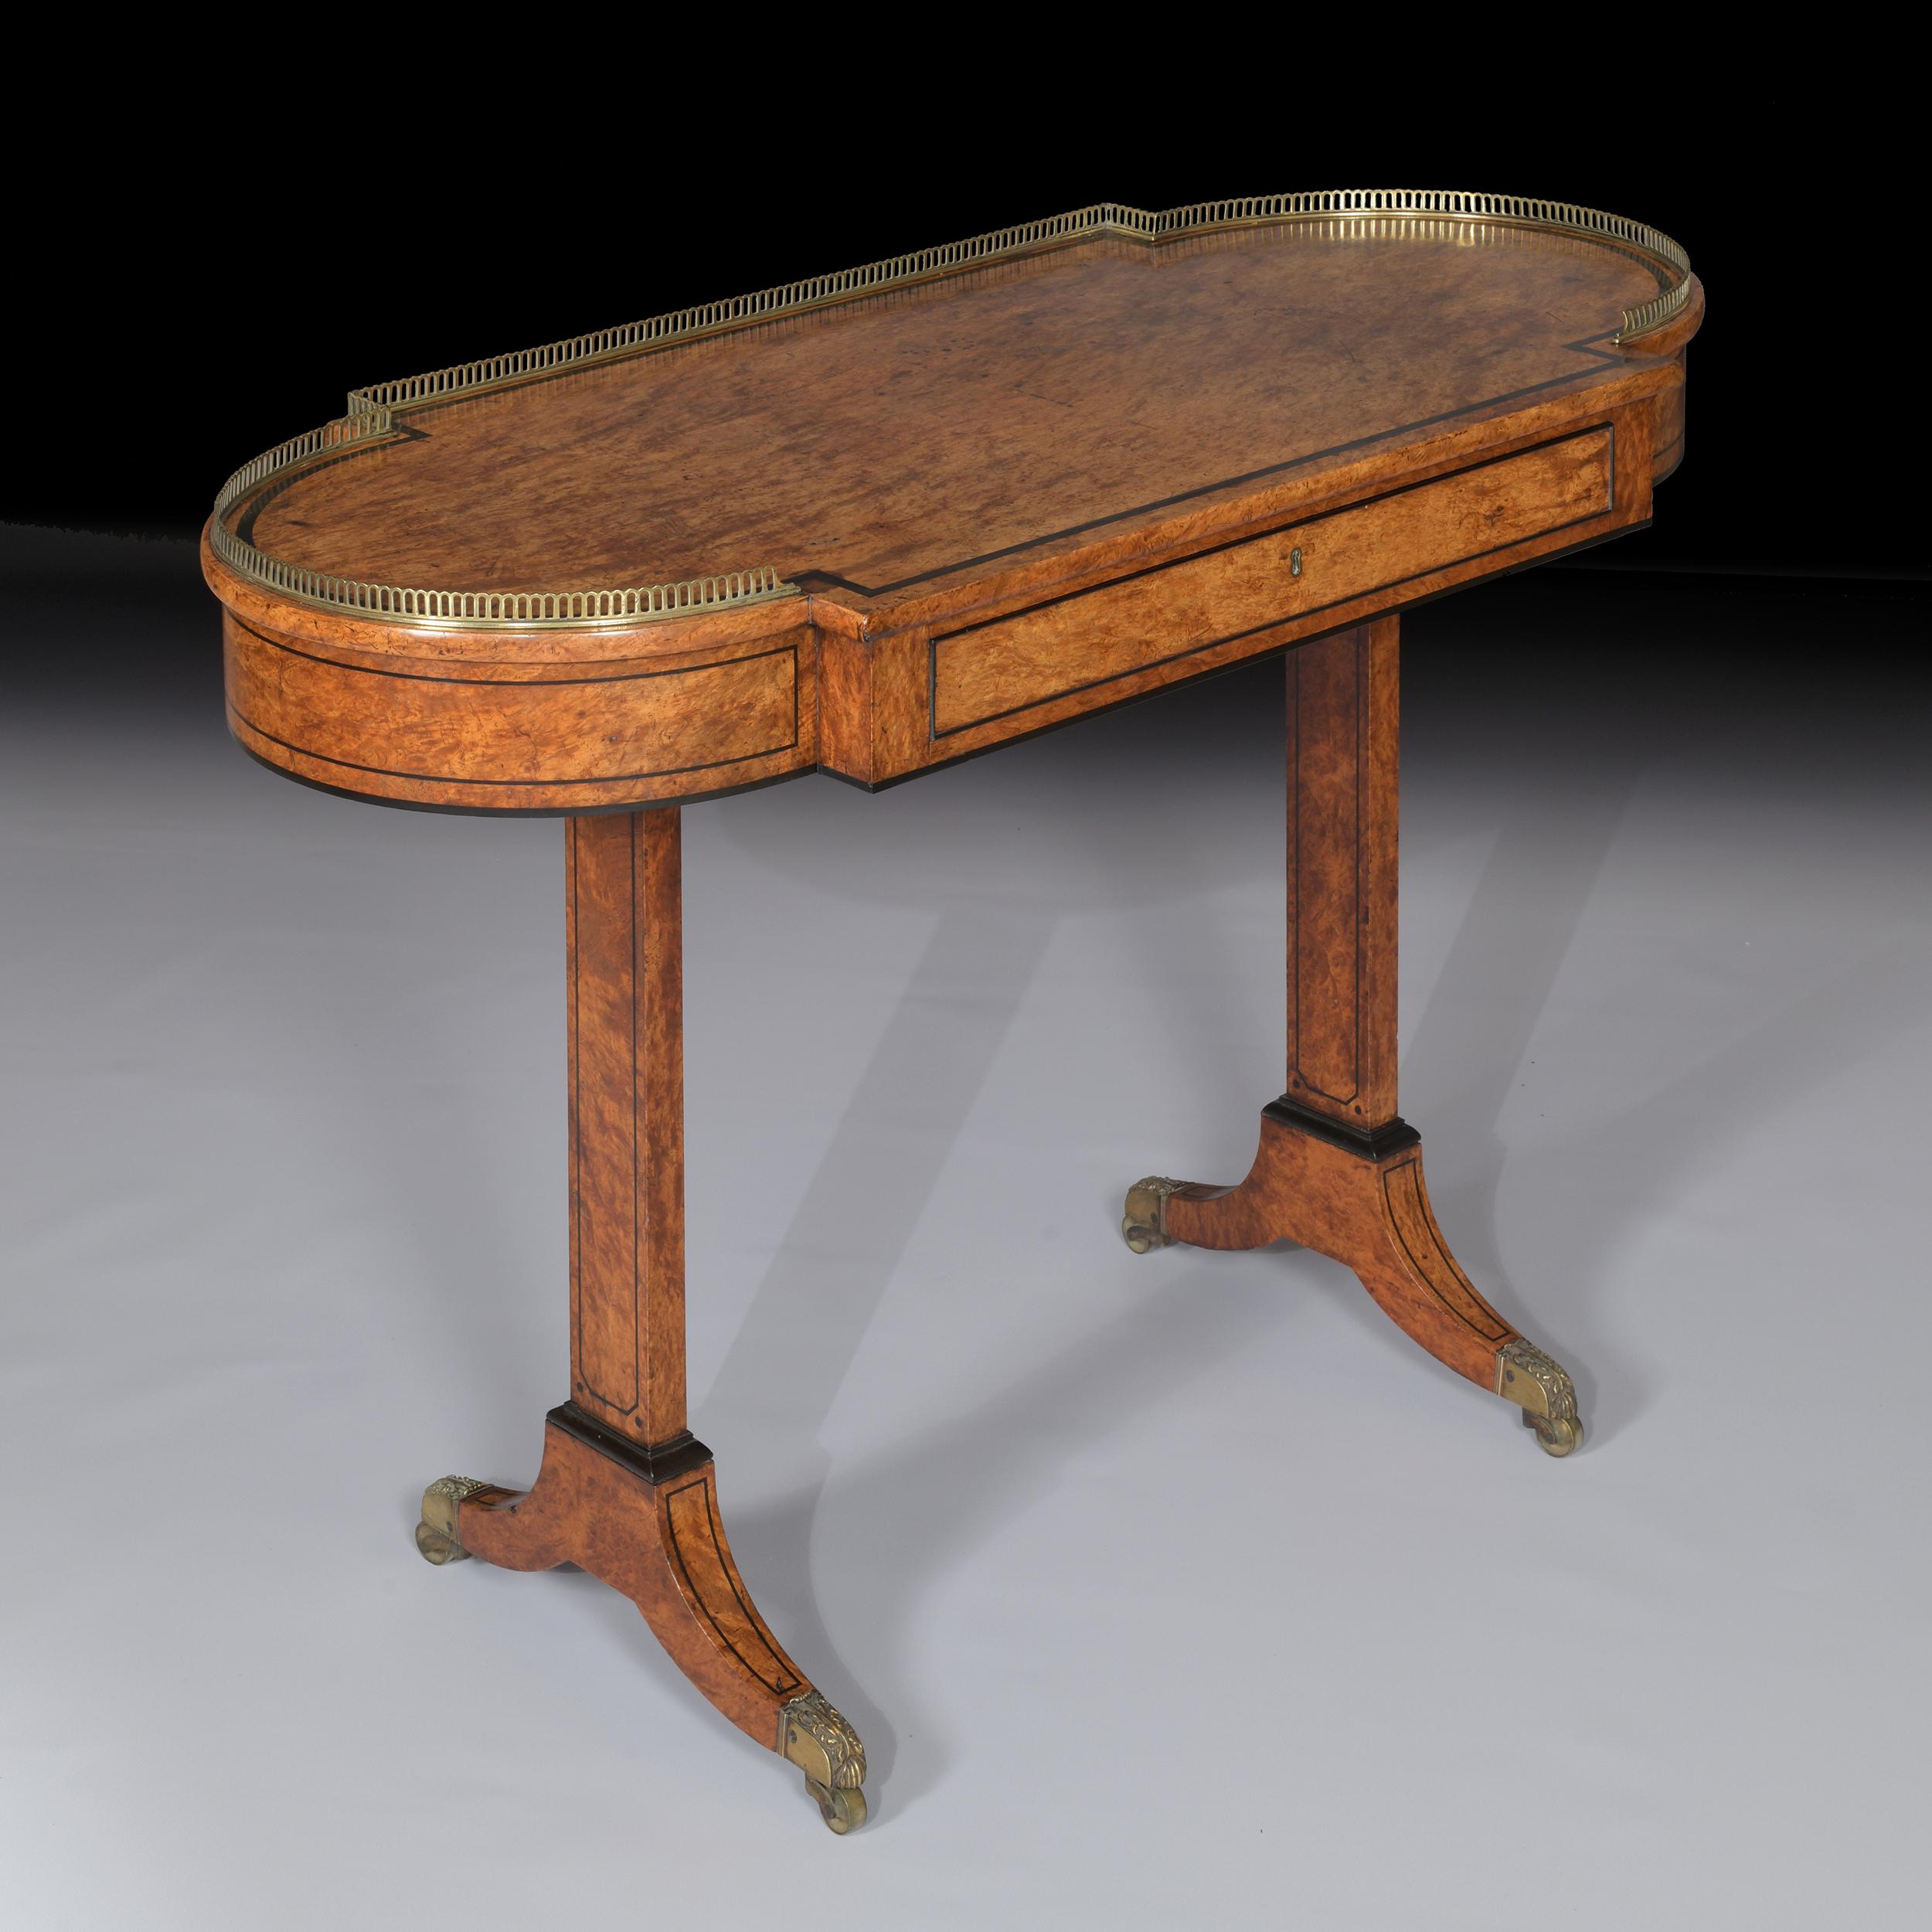 A fine Regency burr elm and ebony strung writing table,the top with bowed ends and a brass three-quarter gallery, the frieze drawer with ebony cockbeading, raised on trestle end supports ending in sabre legs with brass cappings and castors.

Circa